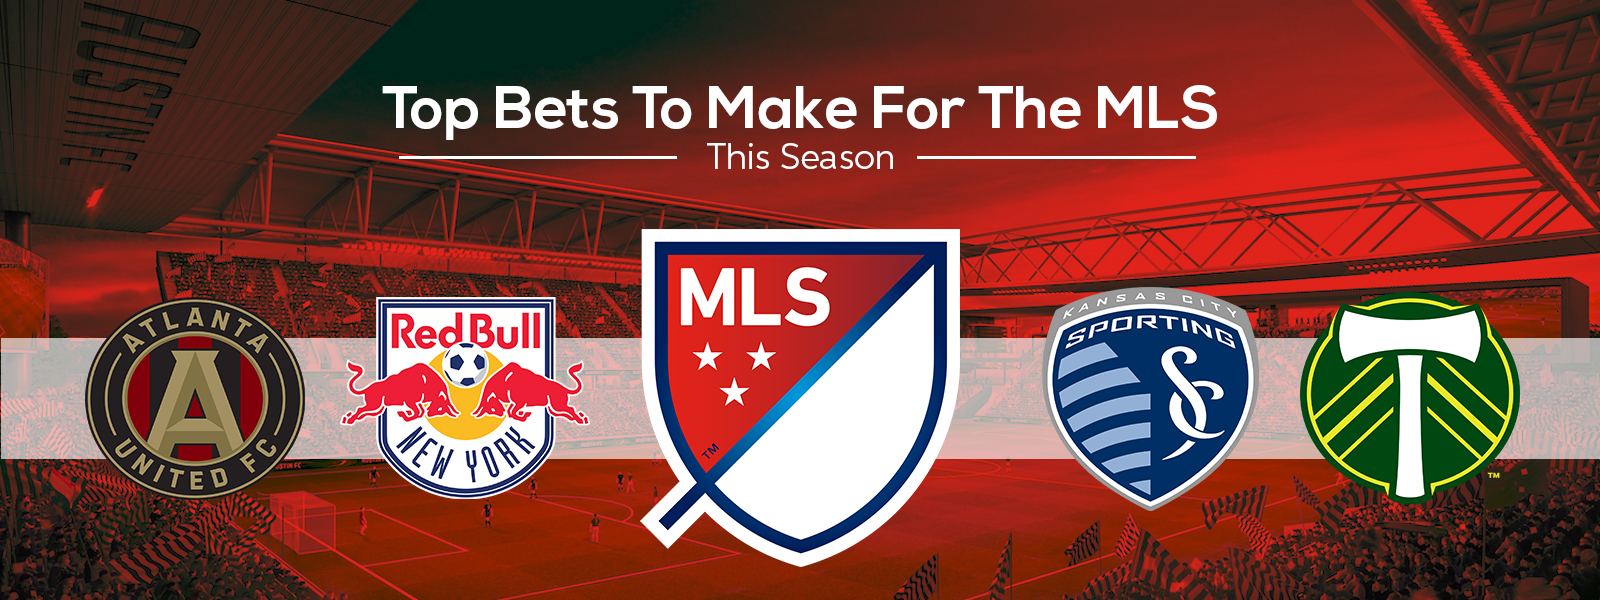 4 Top Soccer Bets For This MLS Season